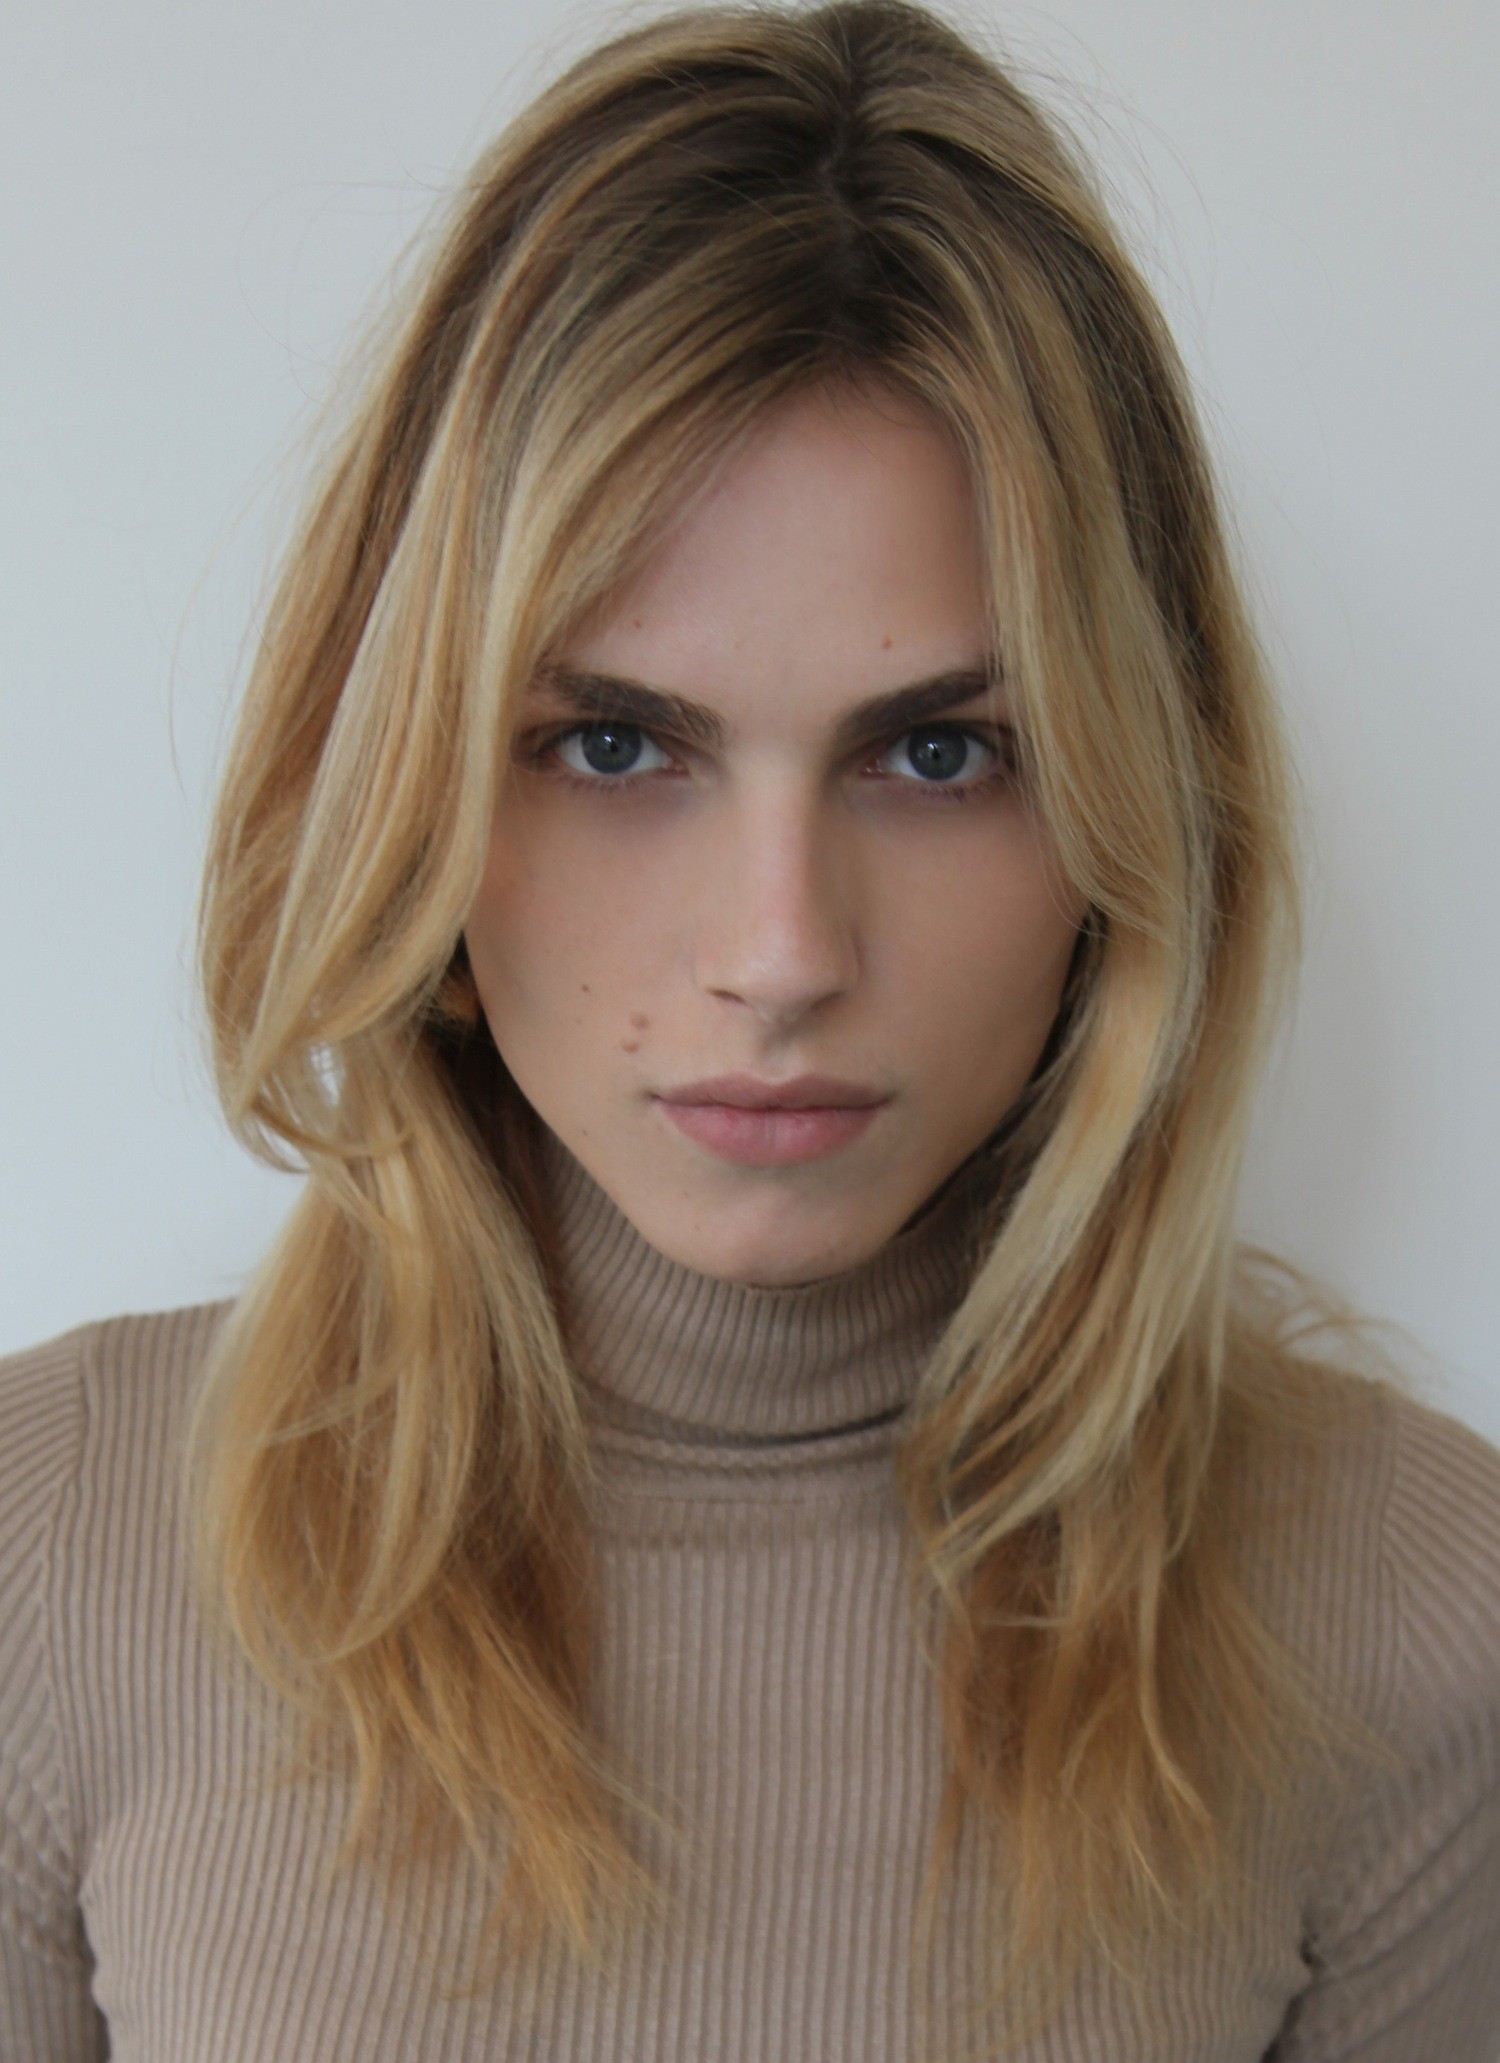 andreja pejic lands a major make-up contract in a breakthrough for ...